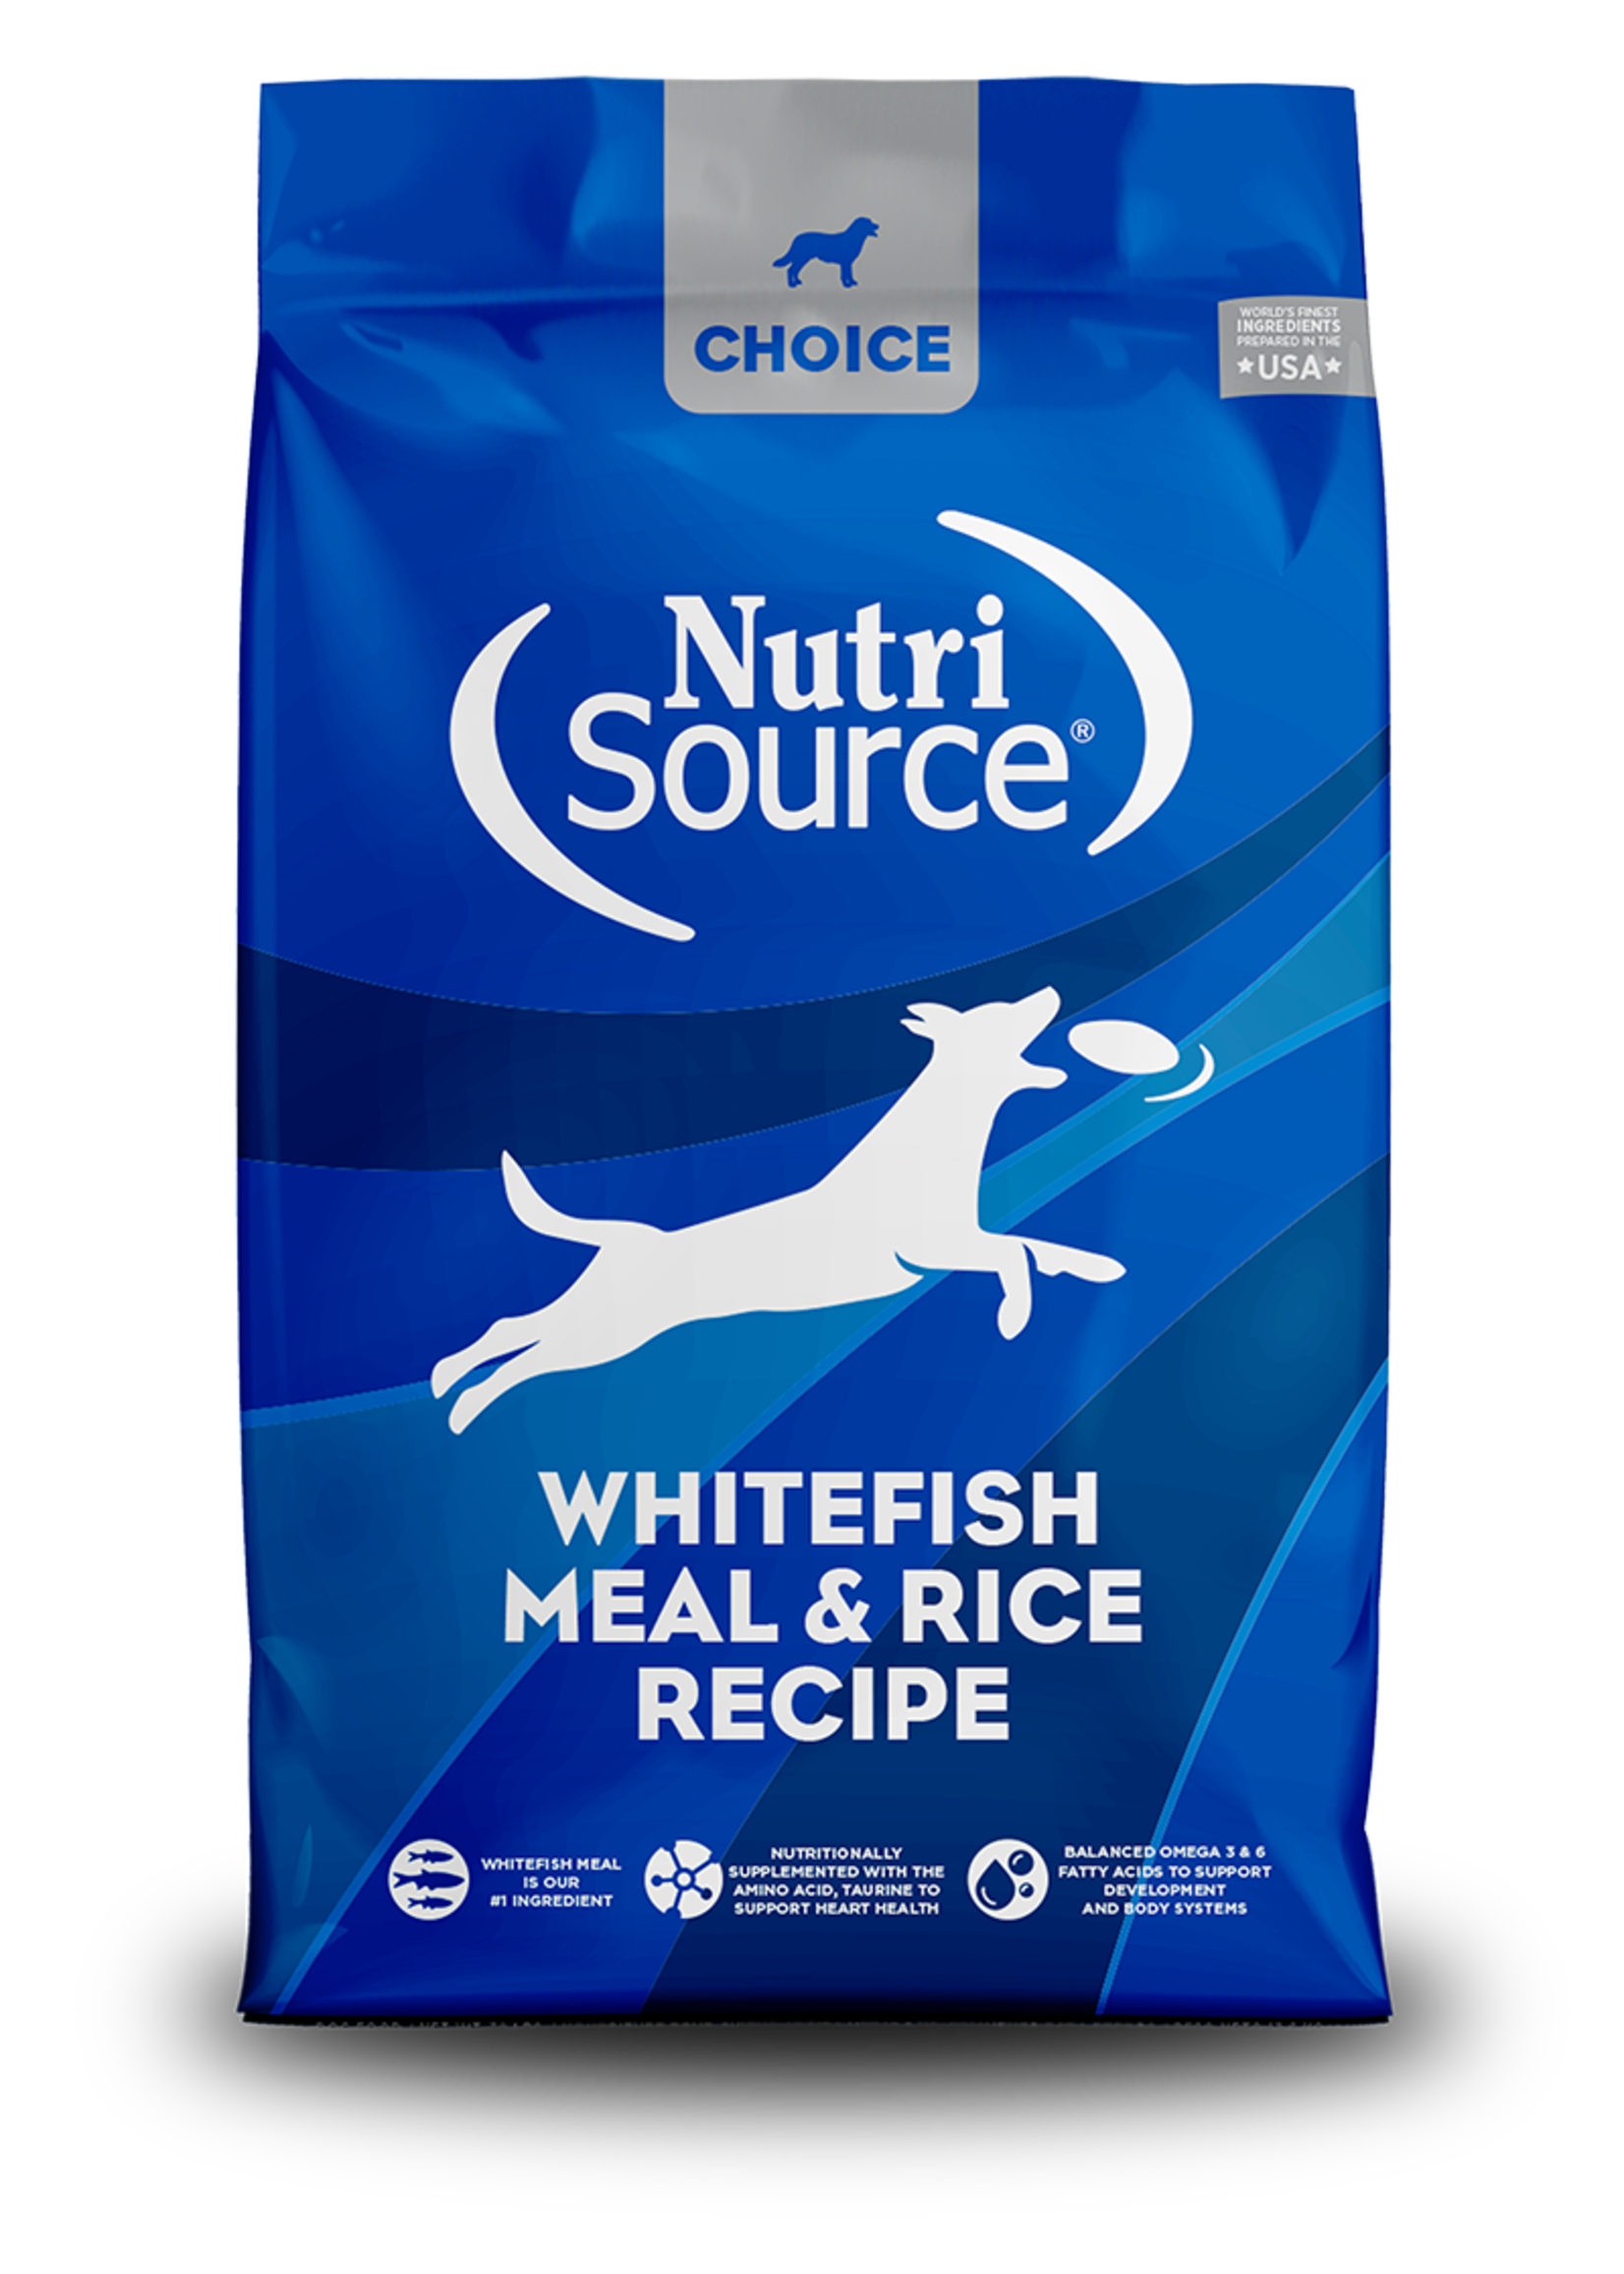 Nutrisource Choice Whitefish Meal & Rice 5 Lb